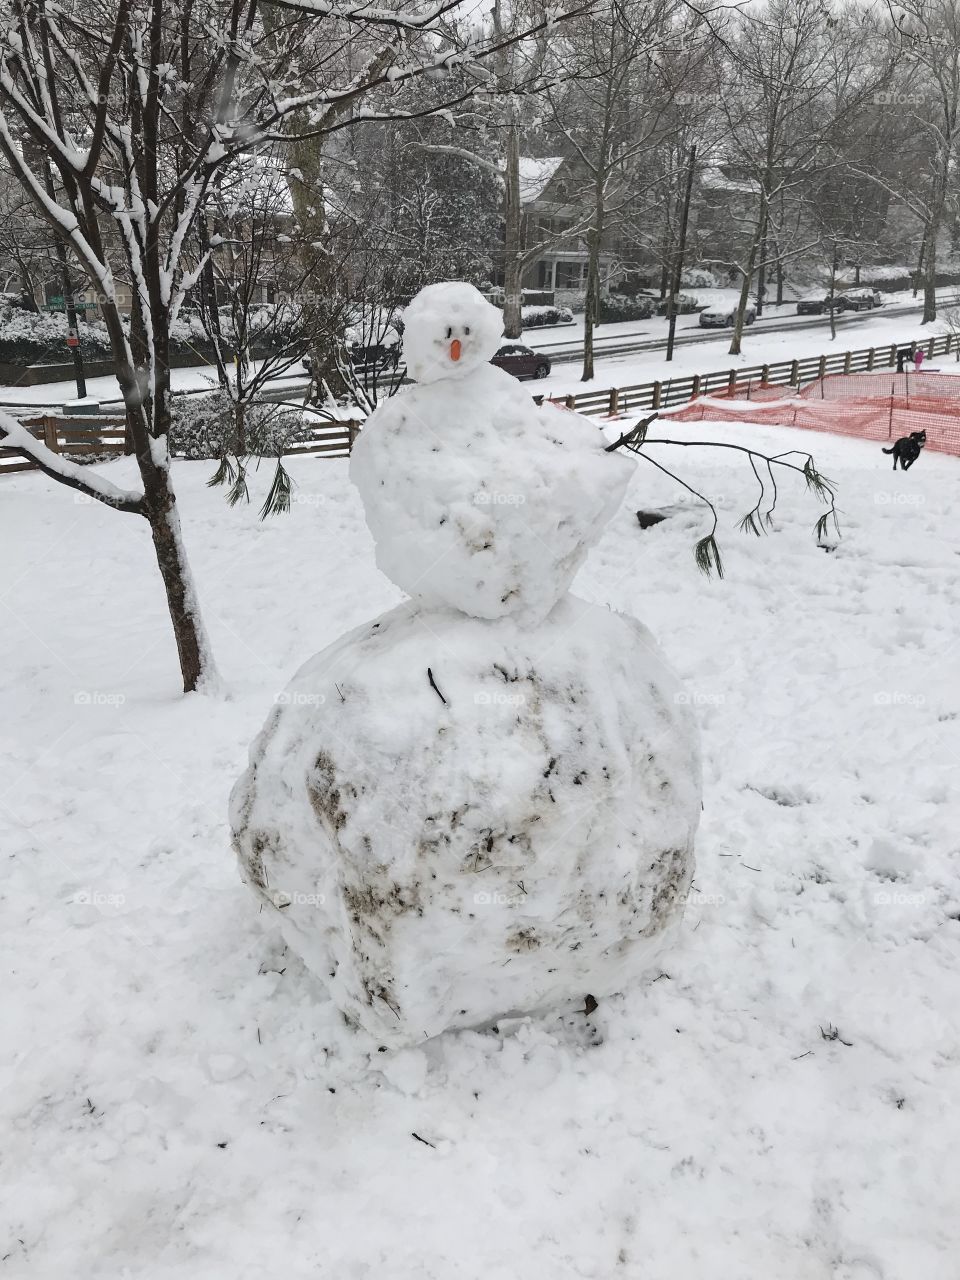 Just a big dirty snowman in the park